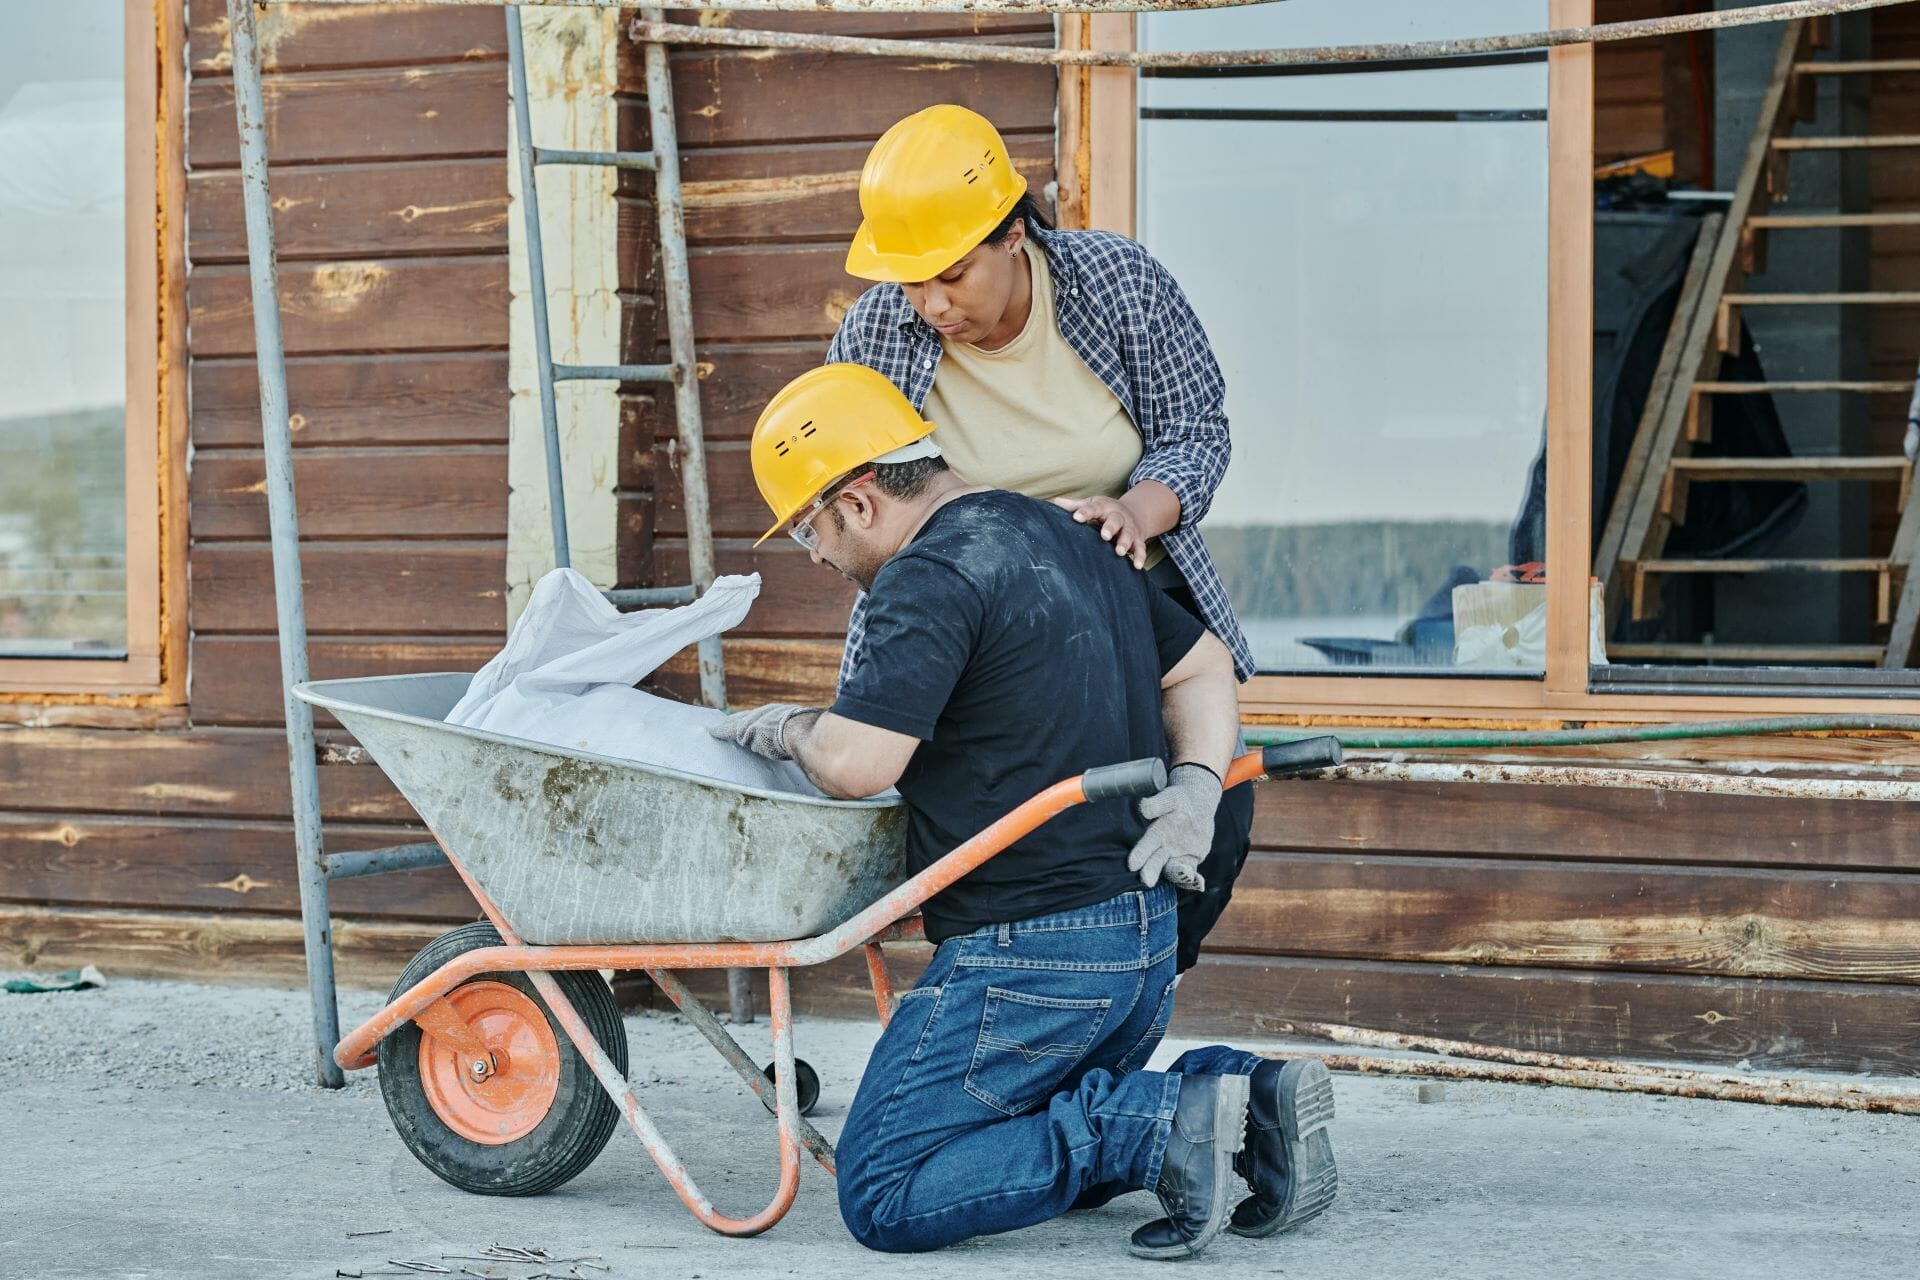 A worker on the ground behind a wheelbarrow holding their lower back after being injured from a profession with a high rate of RSI.